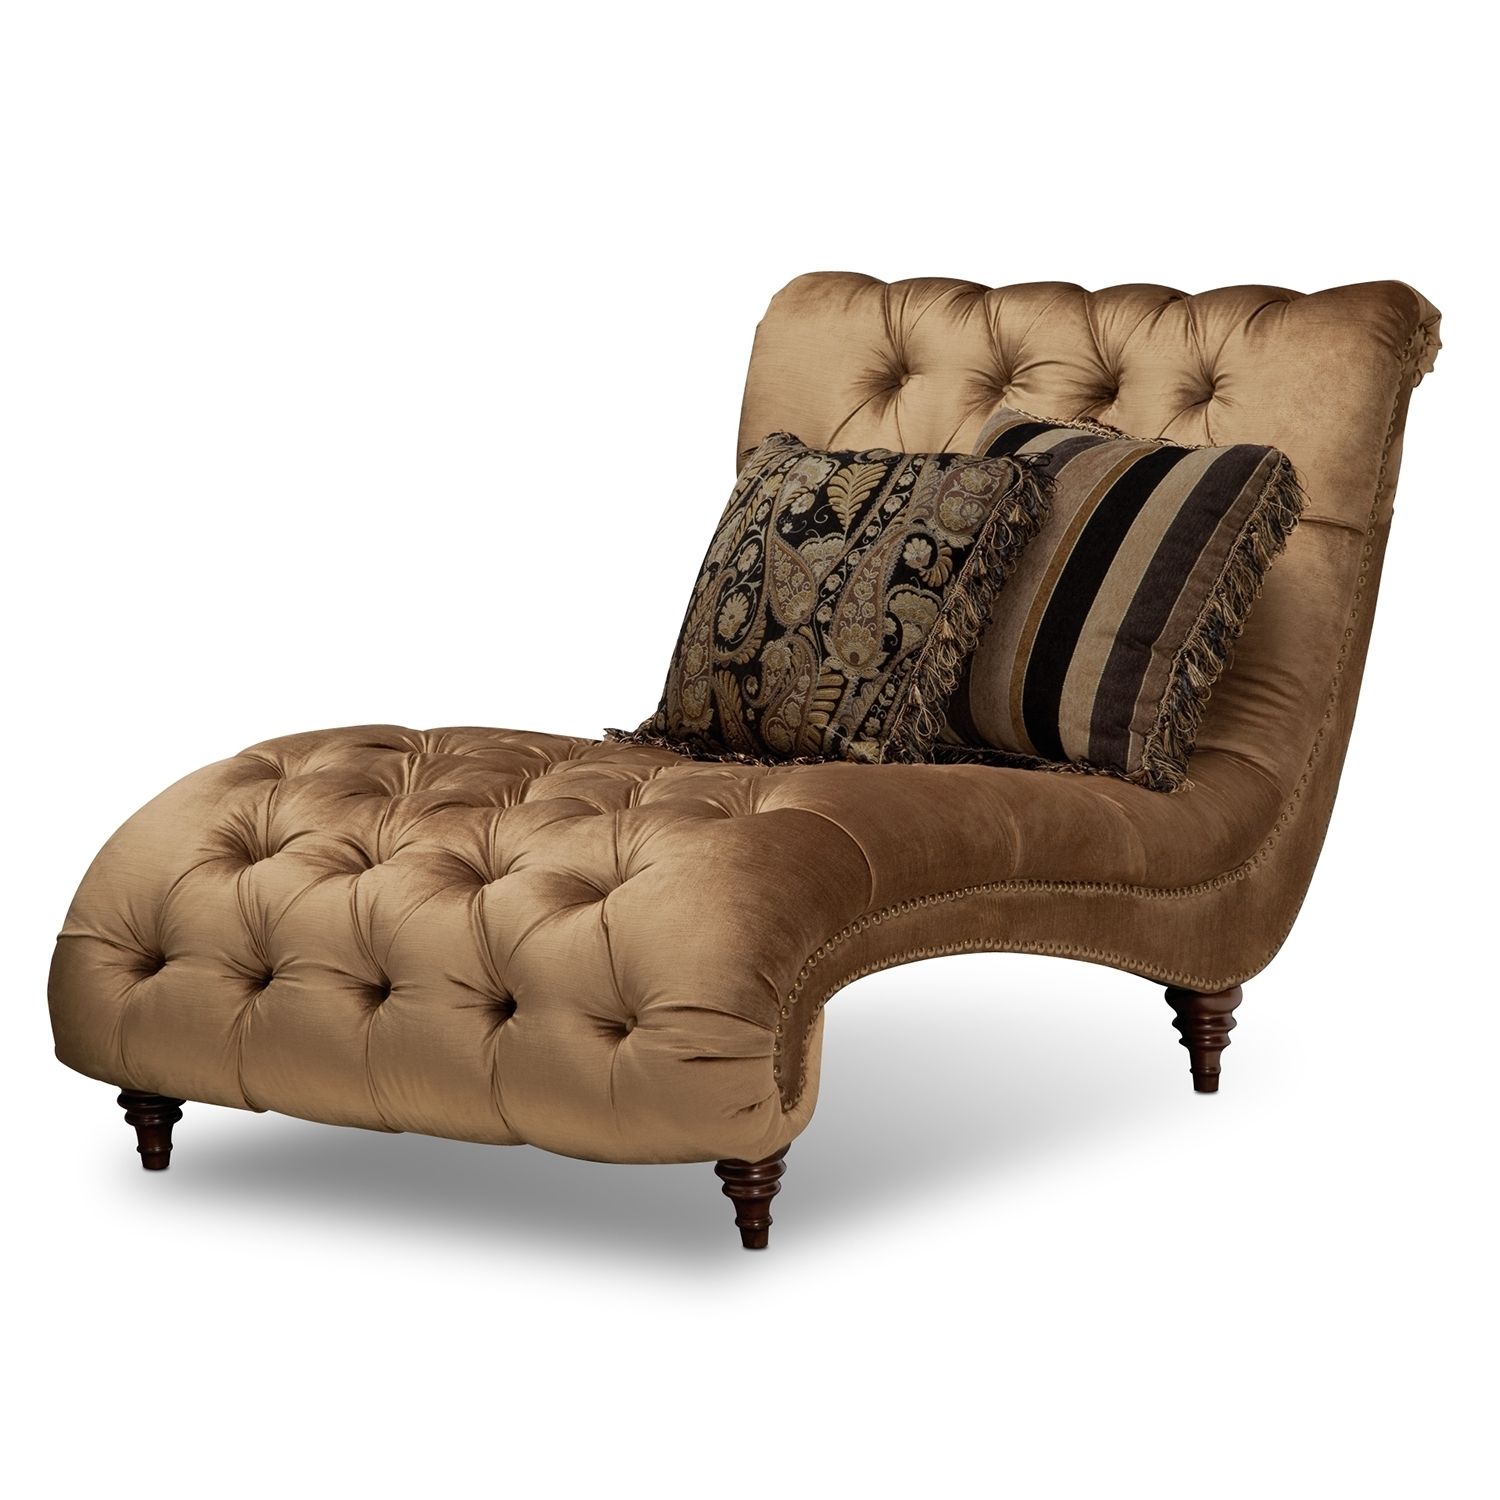 Gold Tufted Chaise Lounge Chair With Accent Pillows In Bedroom Throughout Favorite Velvet Chaise Lounge Chairs (View 12 of 15)